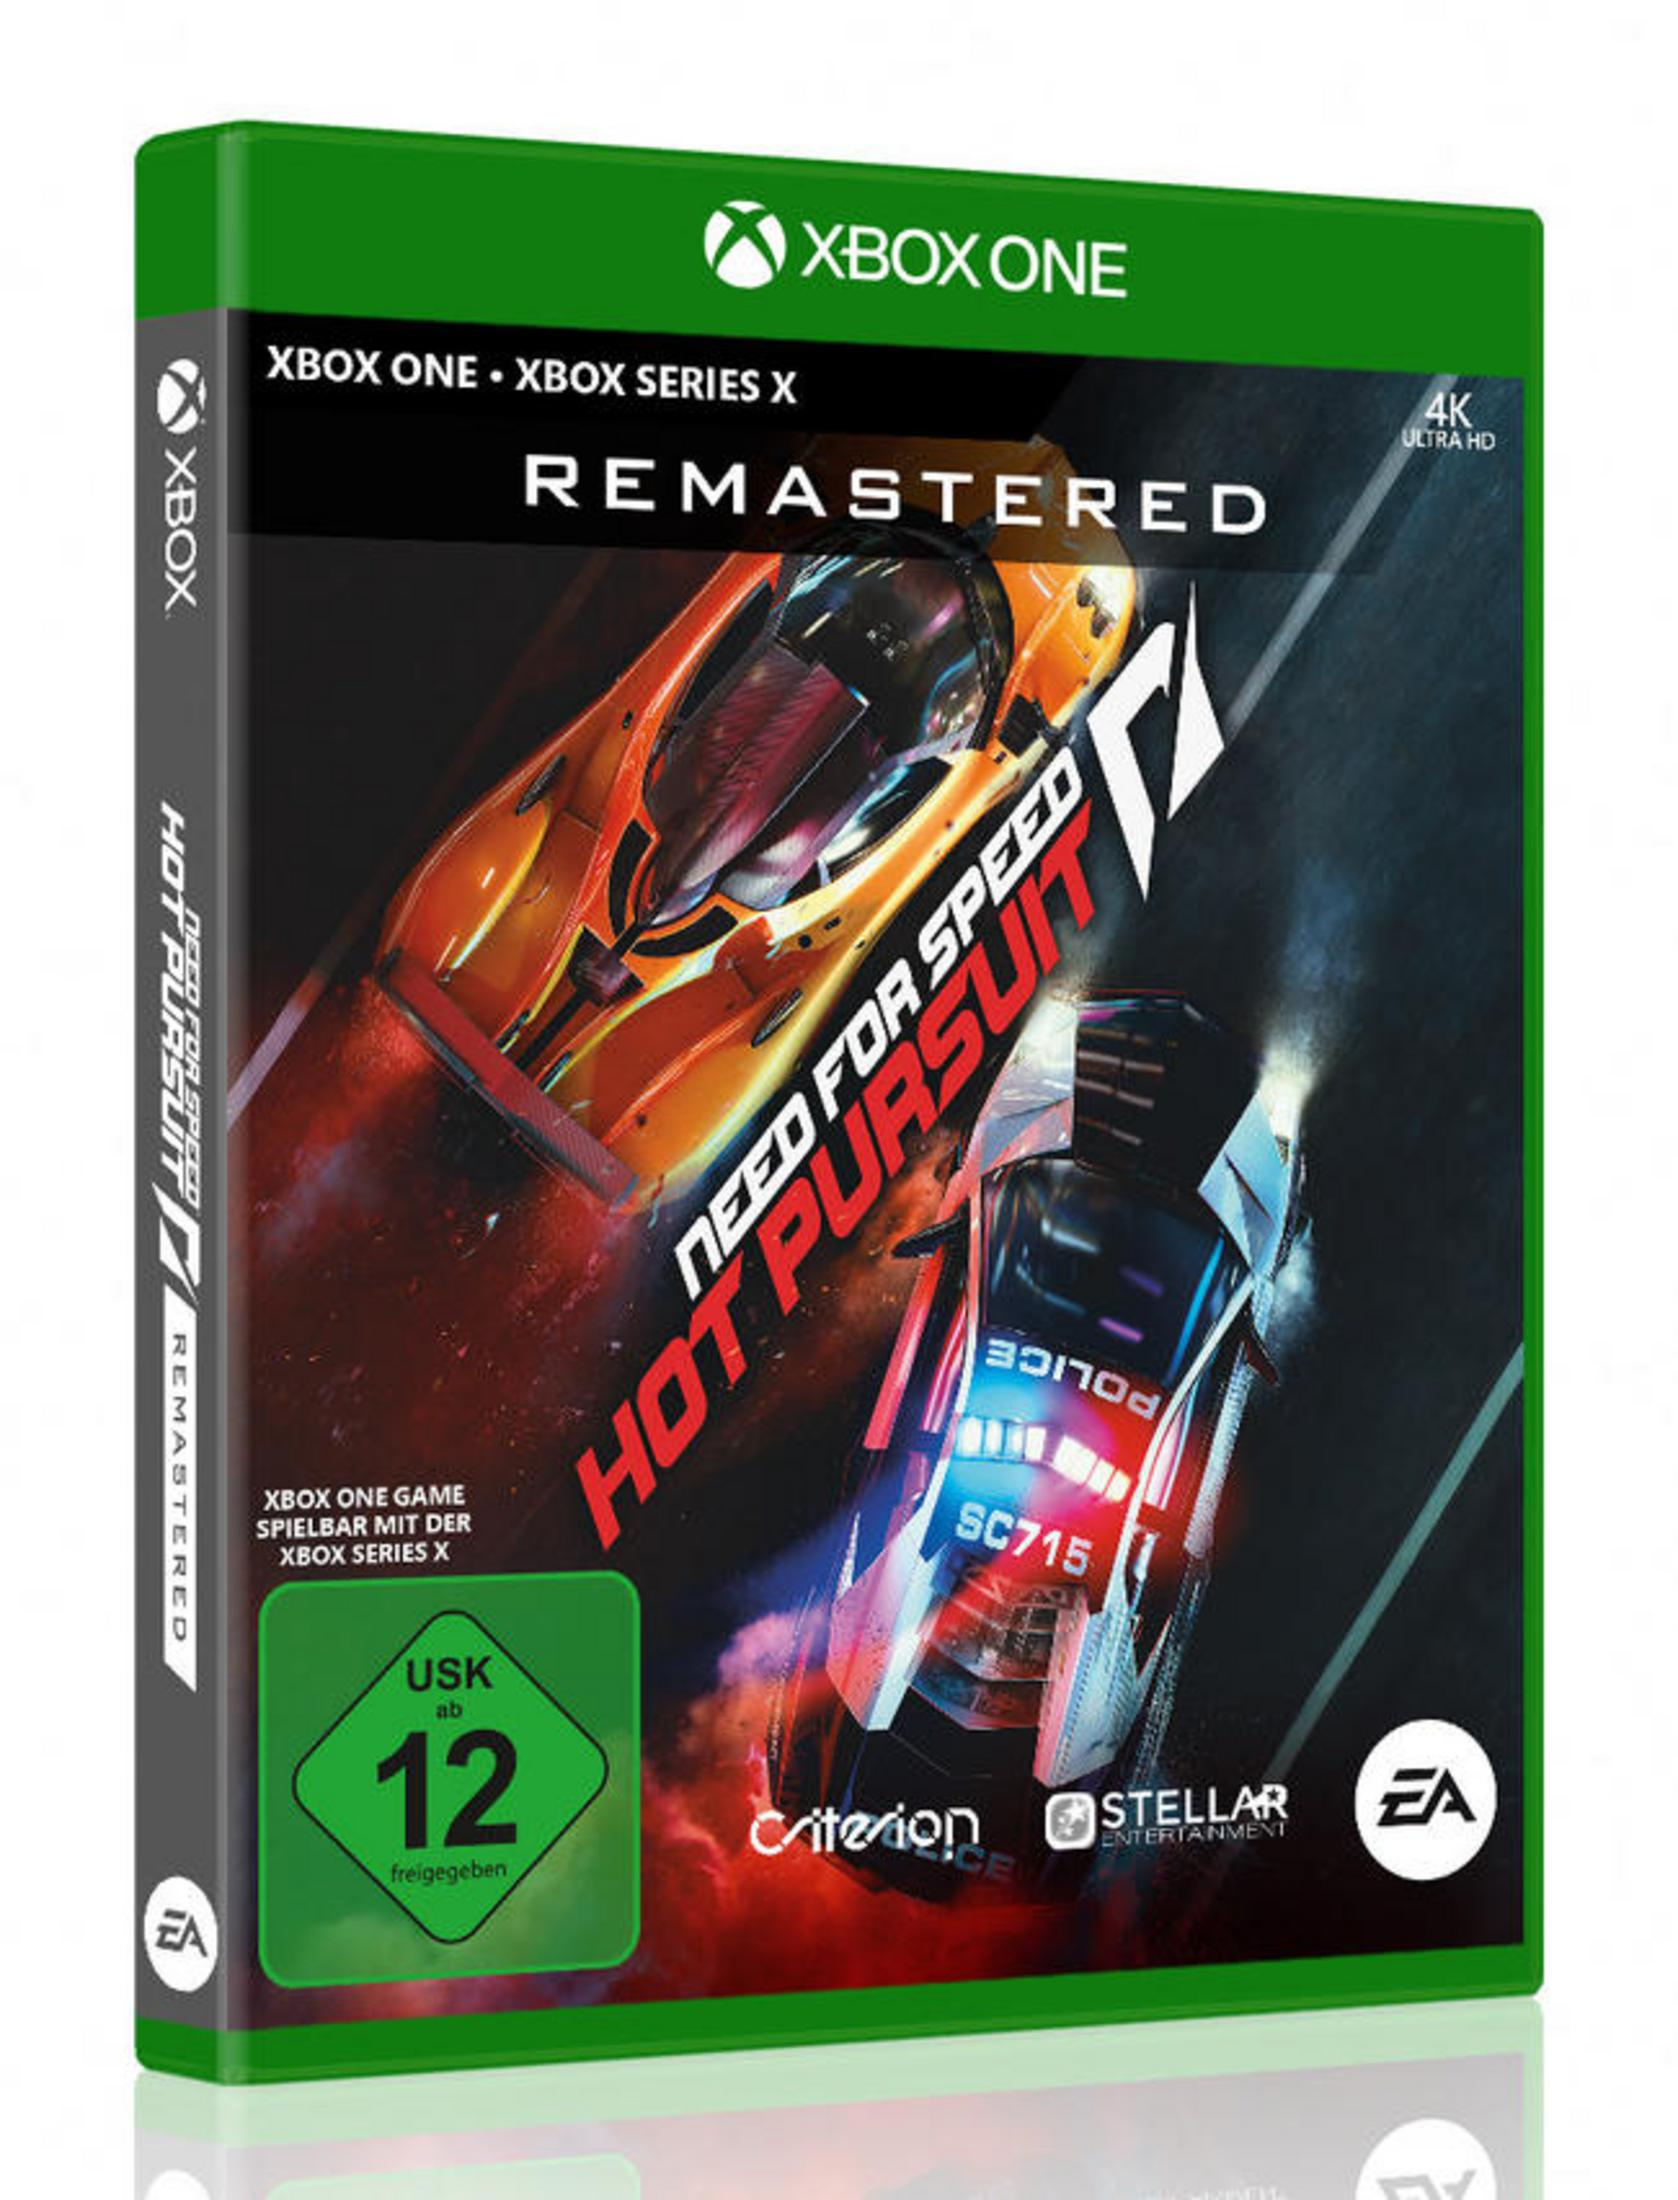 - [Xbox Remastered NFS XB-One Pursuit One] Hot